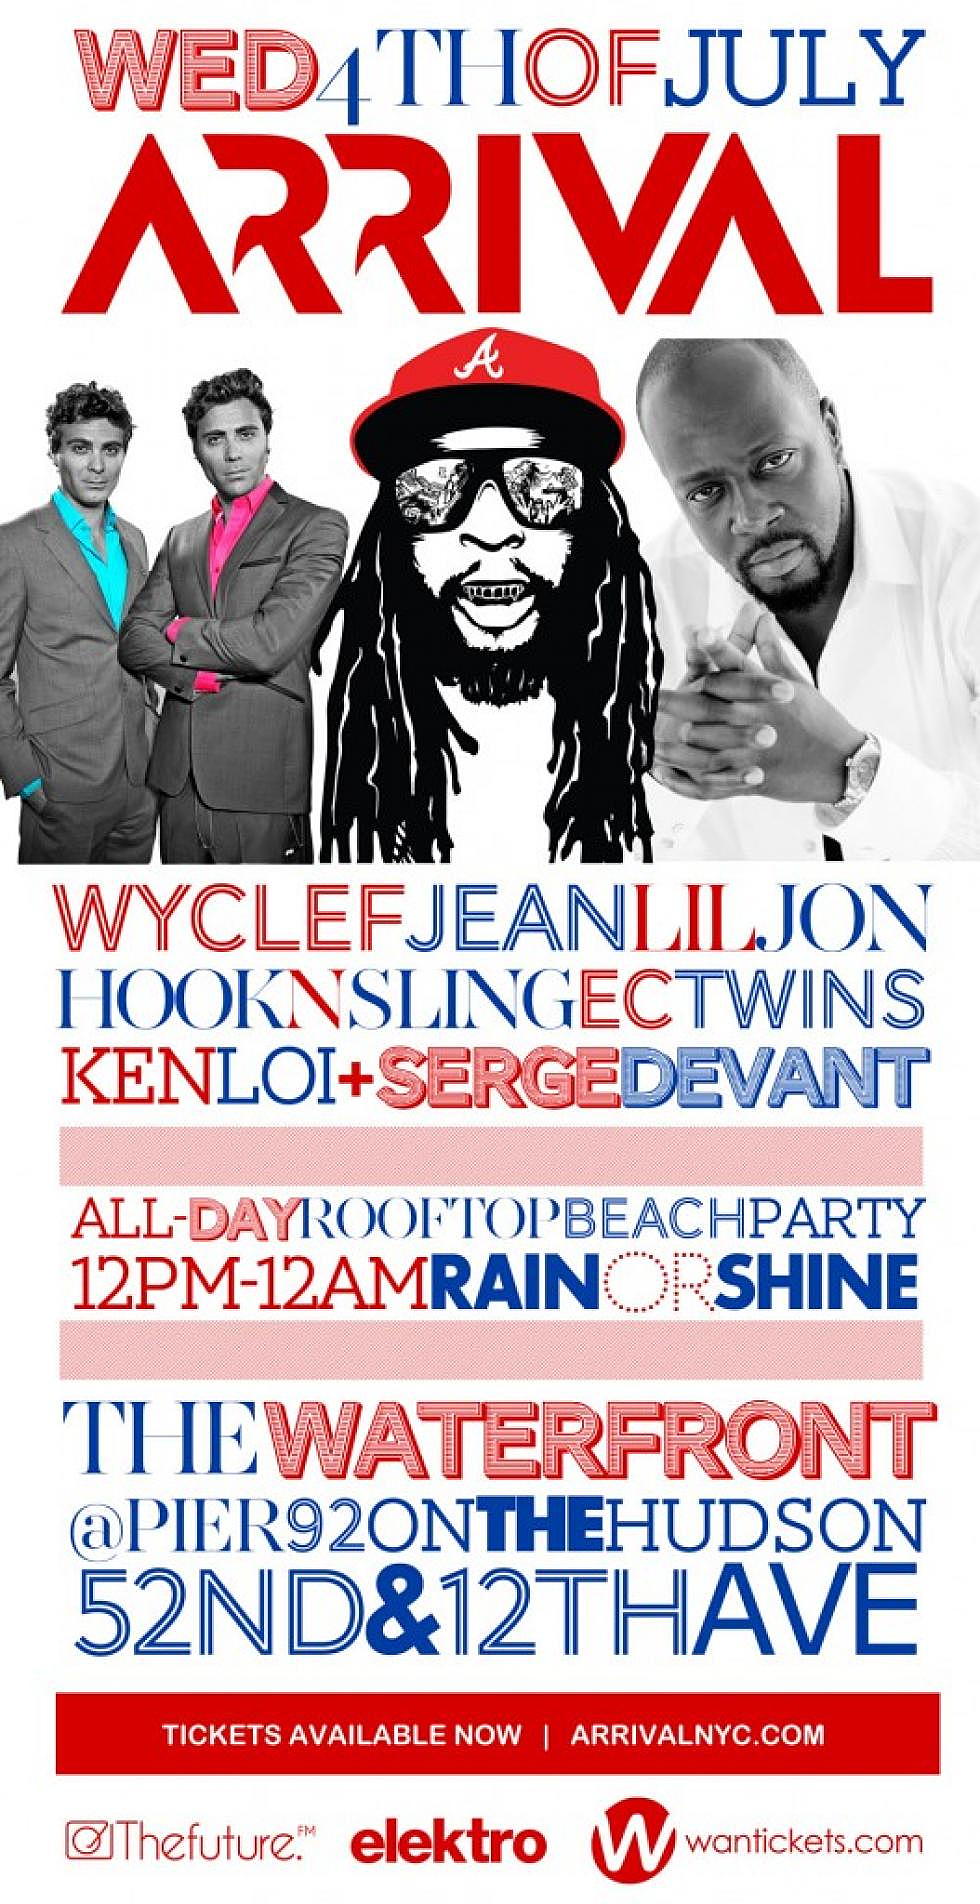 Arrival NYC July 4th Extravaganza w/ Wyclef Jean, Lil Jon, Hook N Sling, EC Twins, Ken Loi and more